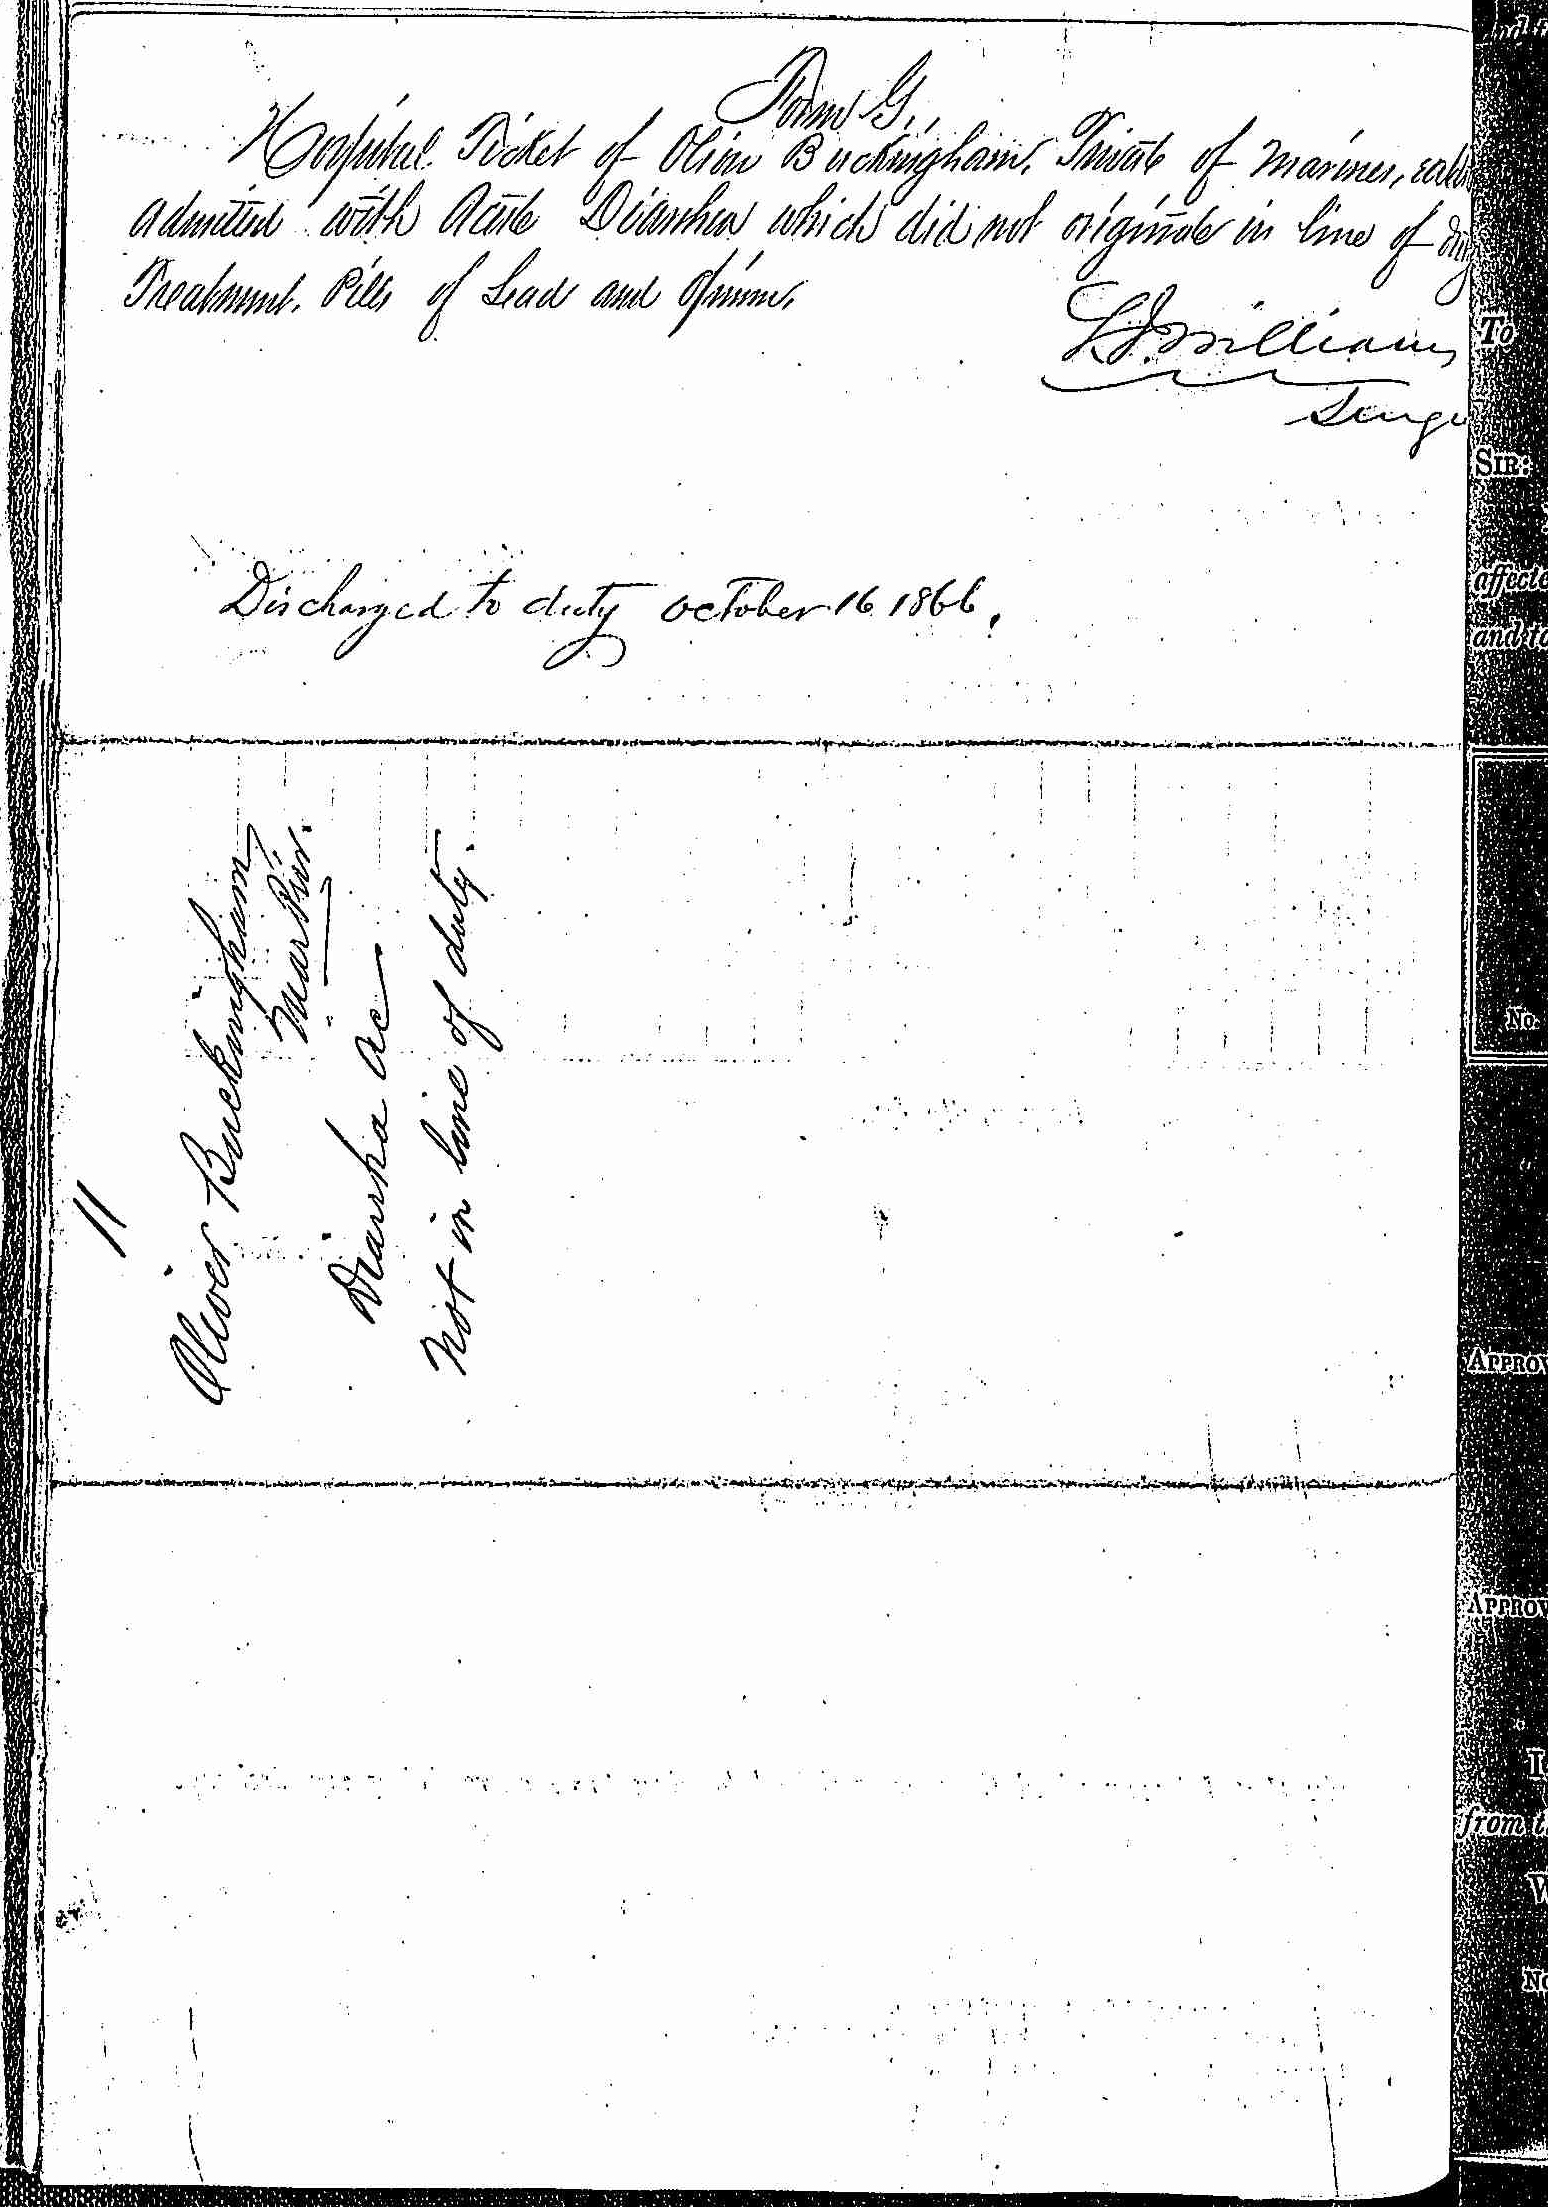 Entry for Oliver Buckingham (page 2 of 2) in the log Hospital Tickets and Case Papers - Naval Hospital - Washington, D.C. - 1865-68